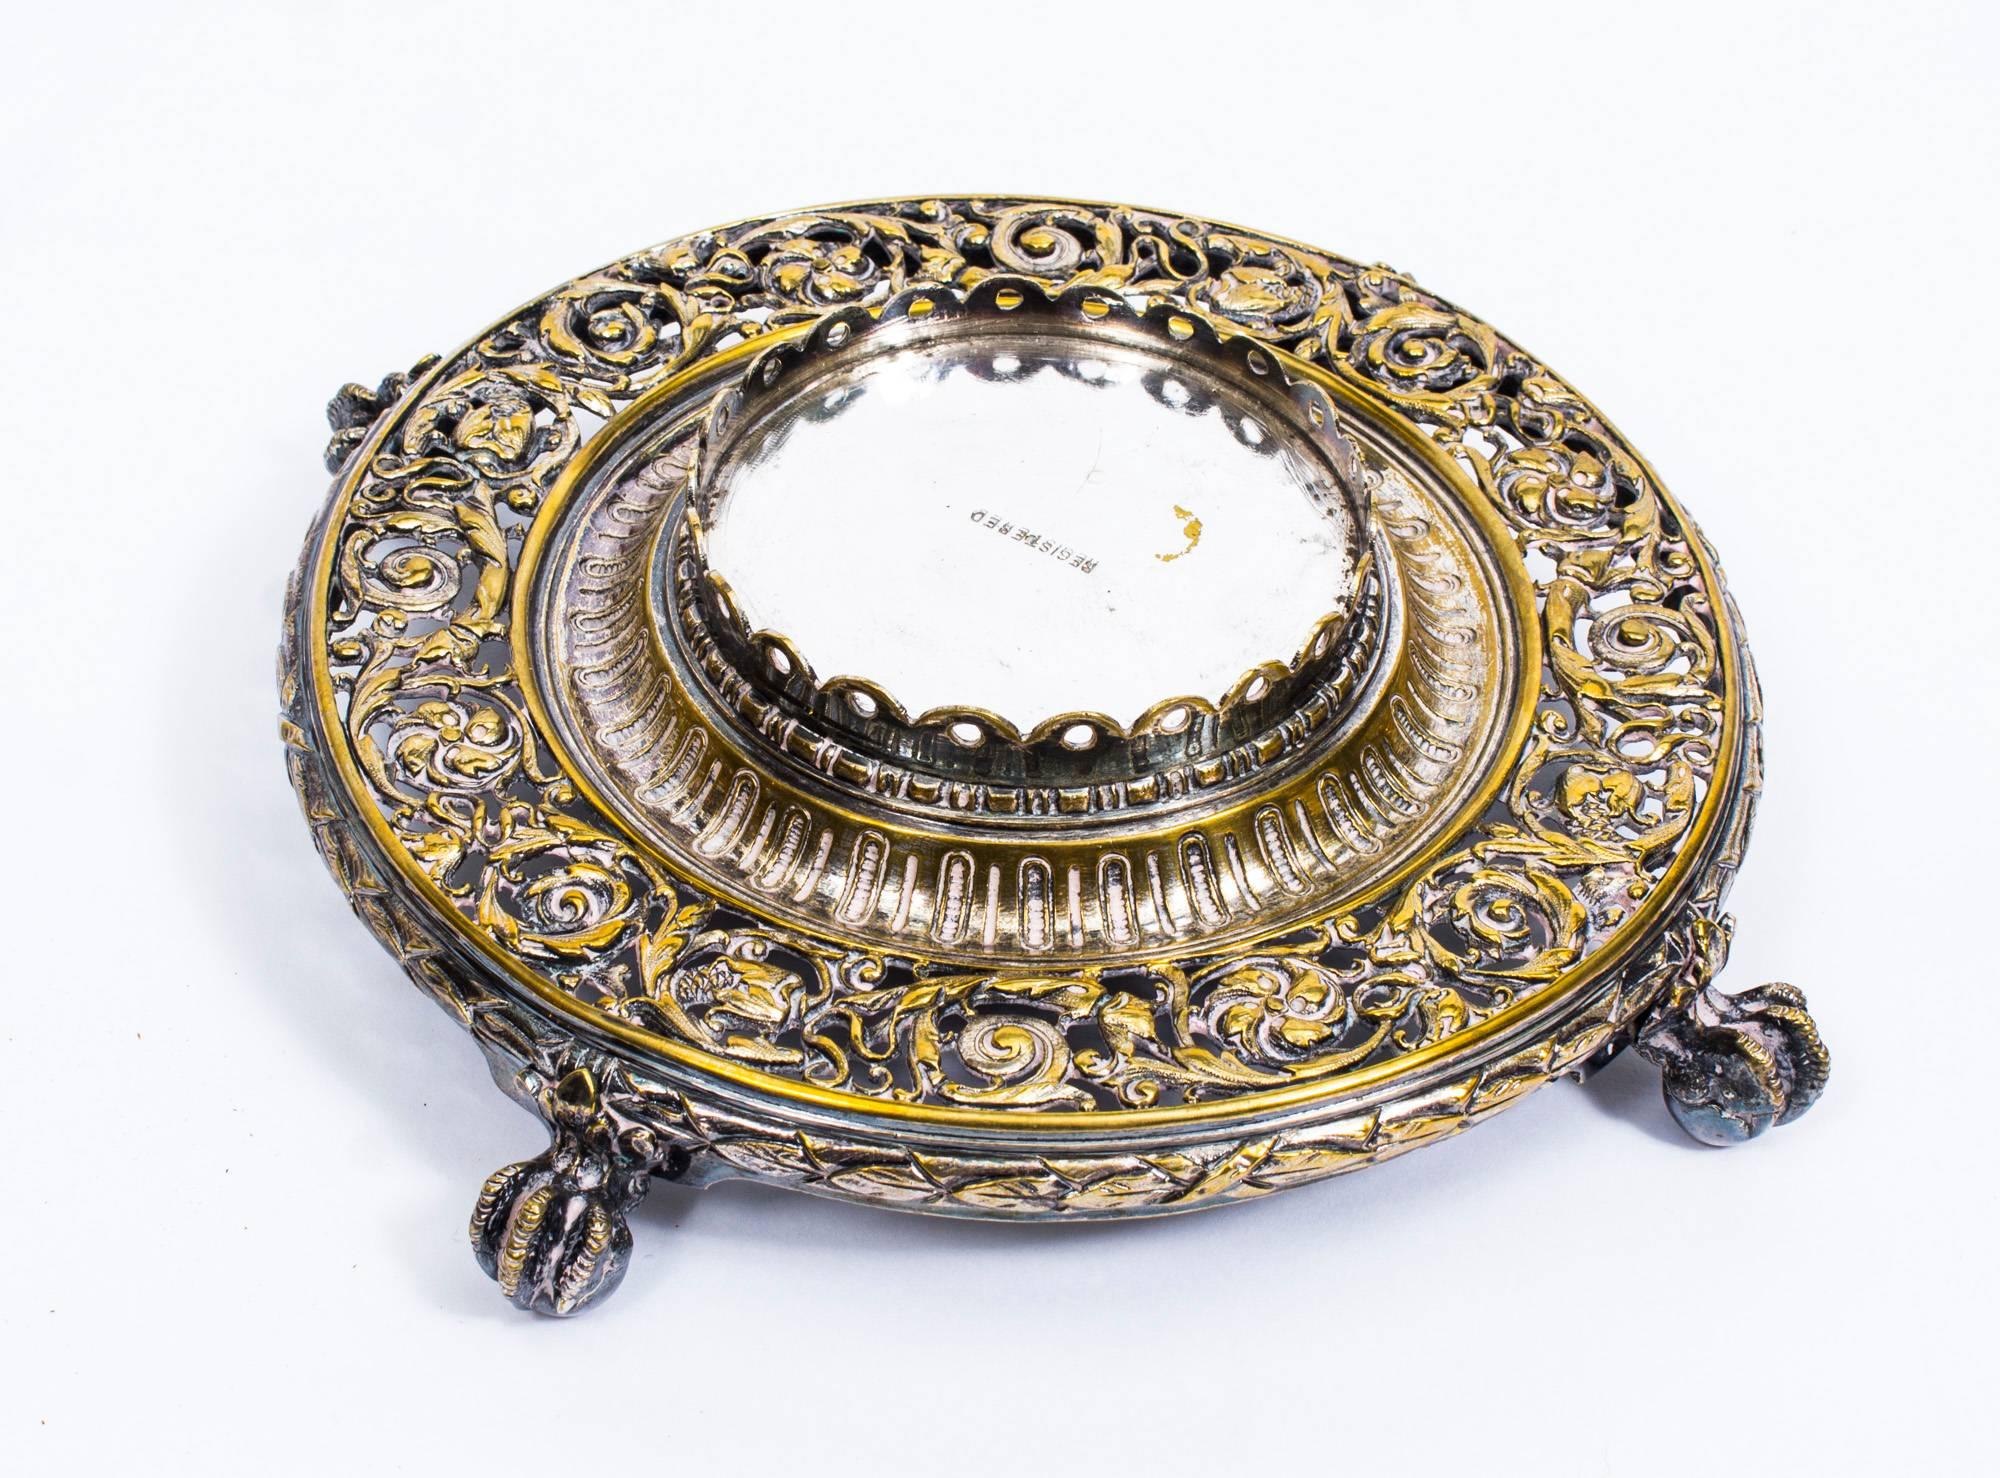 This is a lovely antique Victorian Shefield silver plated ormolu encrier/ink well with lid, dating from circa 1850.

It features a detachable glass ink well with a silver-plated collar and acorn finial hinged cover on a circular base decorated